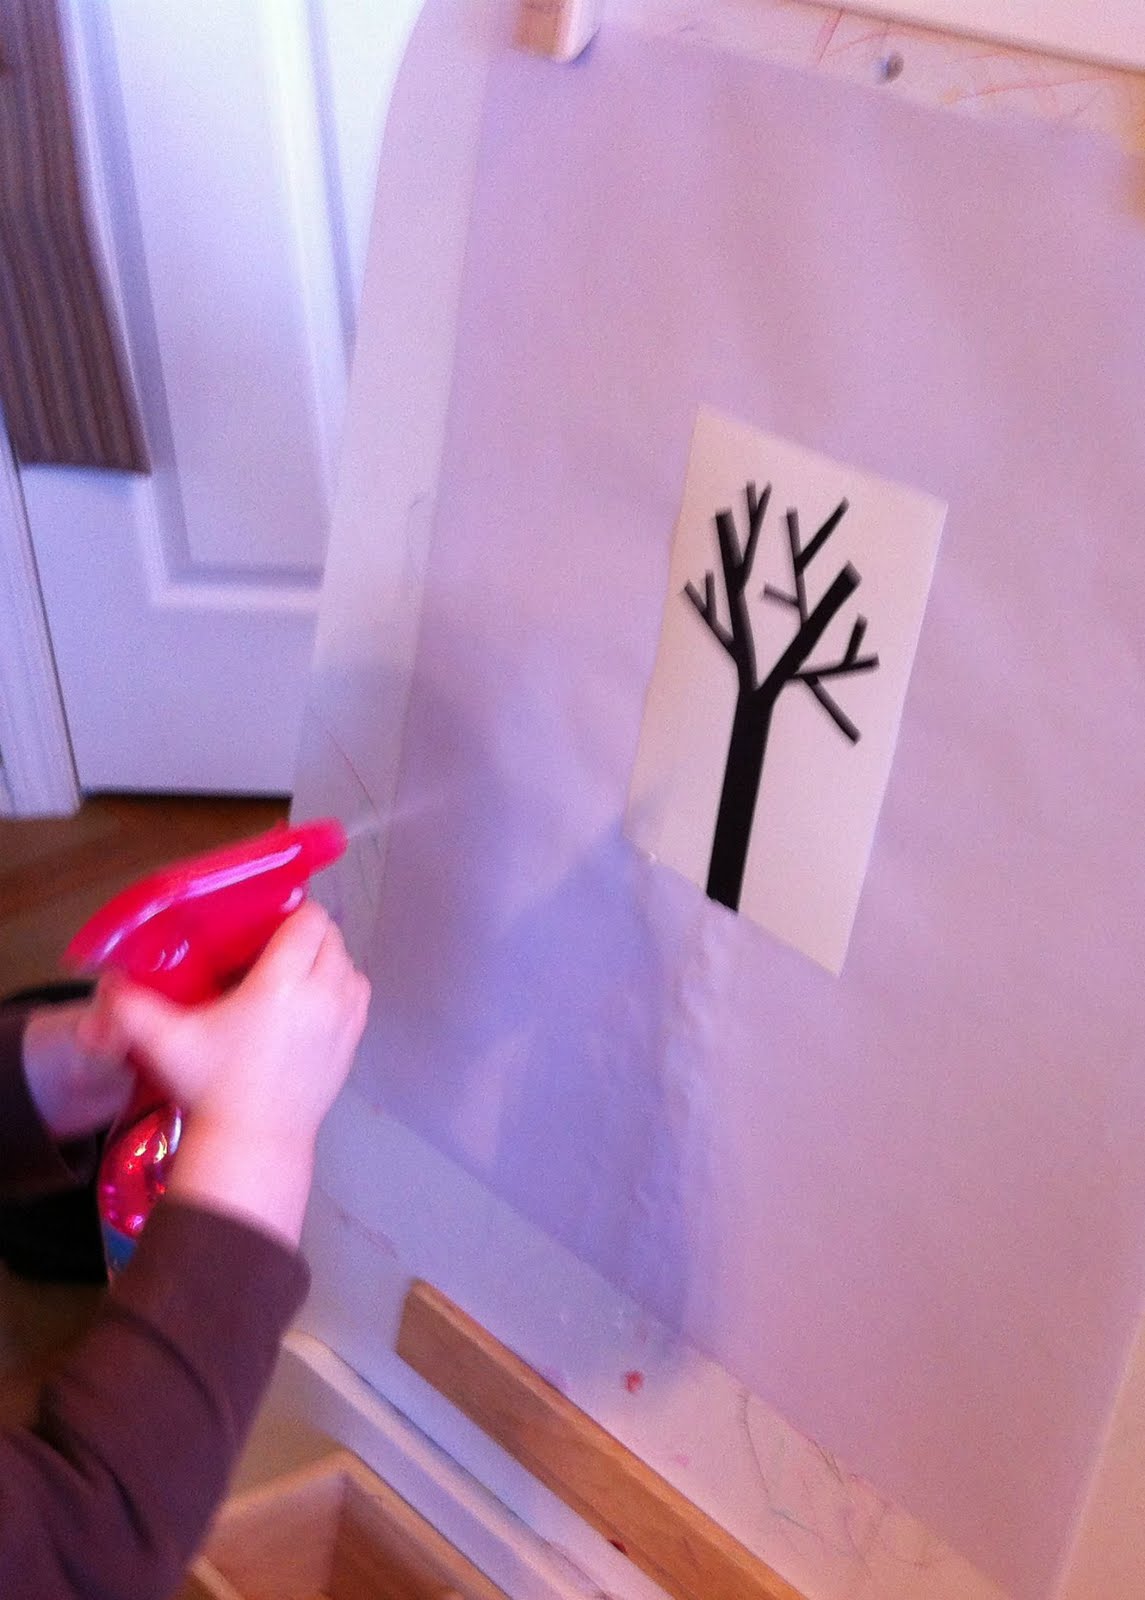 Testy yet trying: Tape Resist Watercolor Trees - with Salt Effect